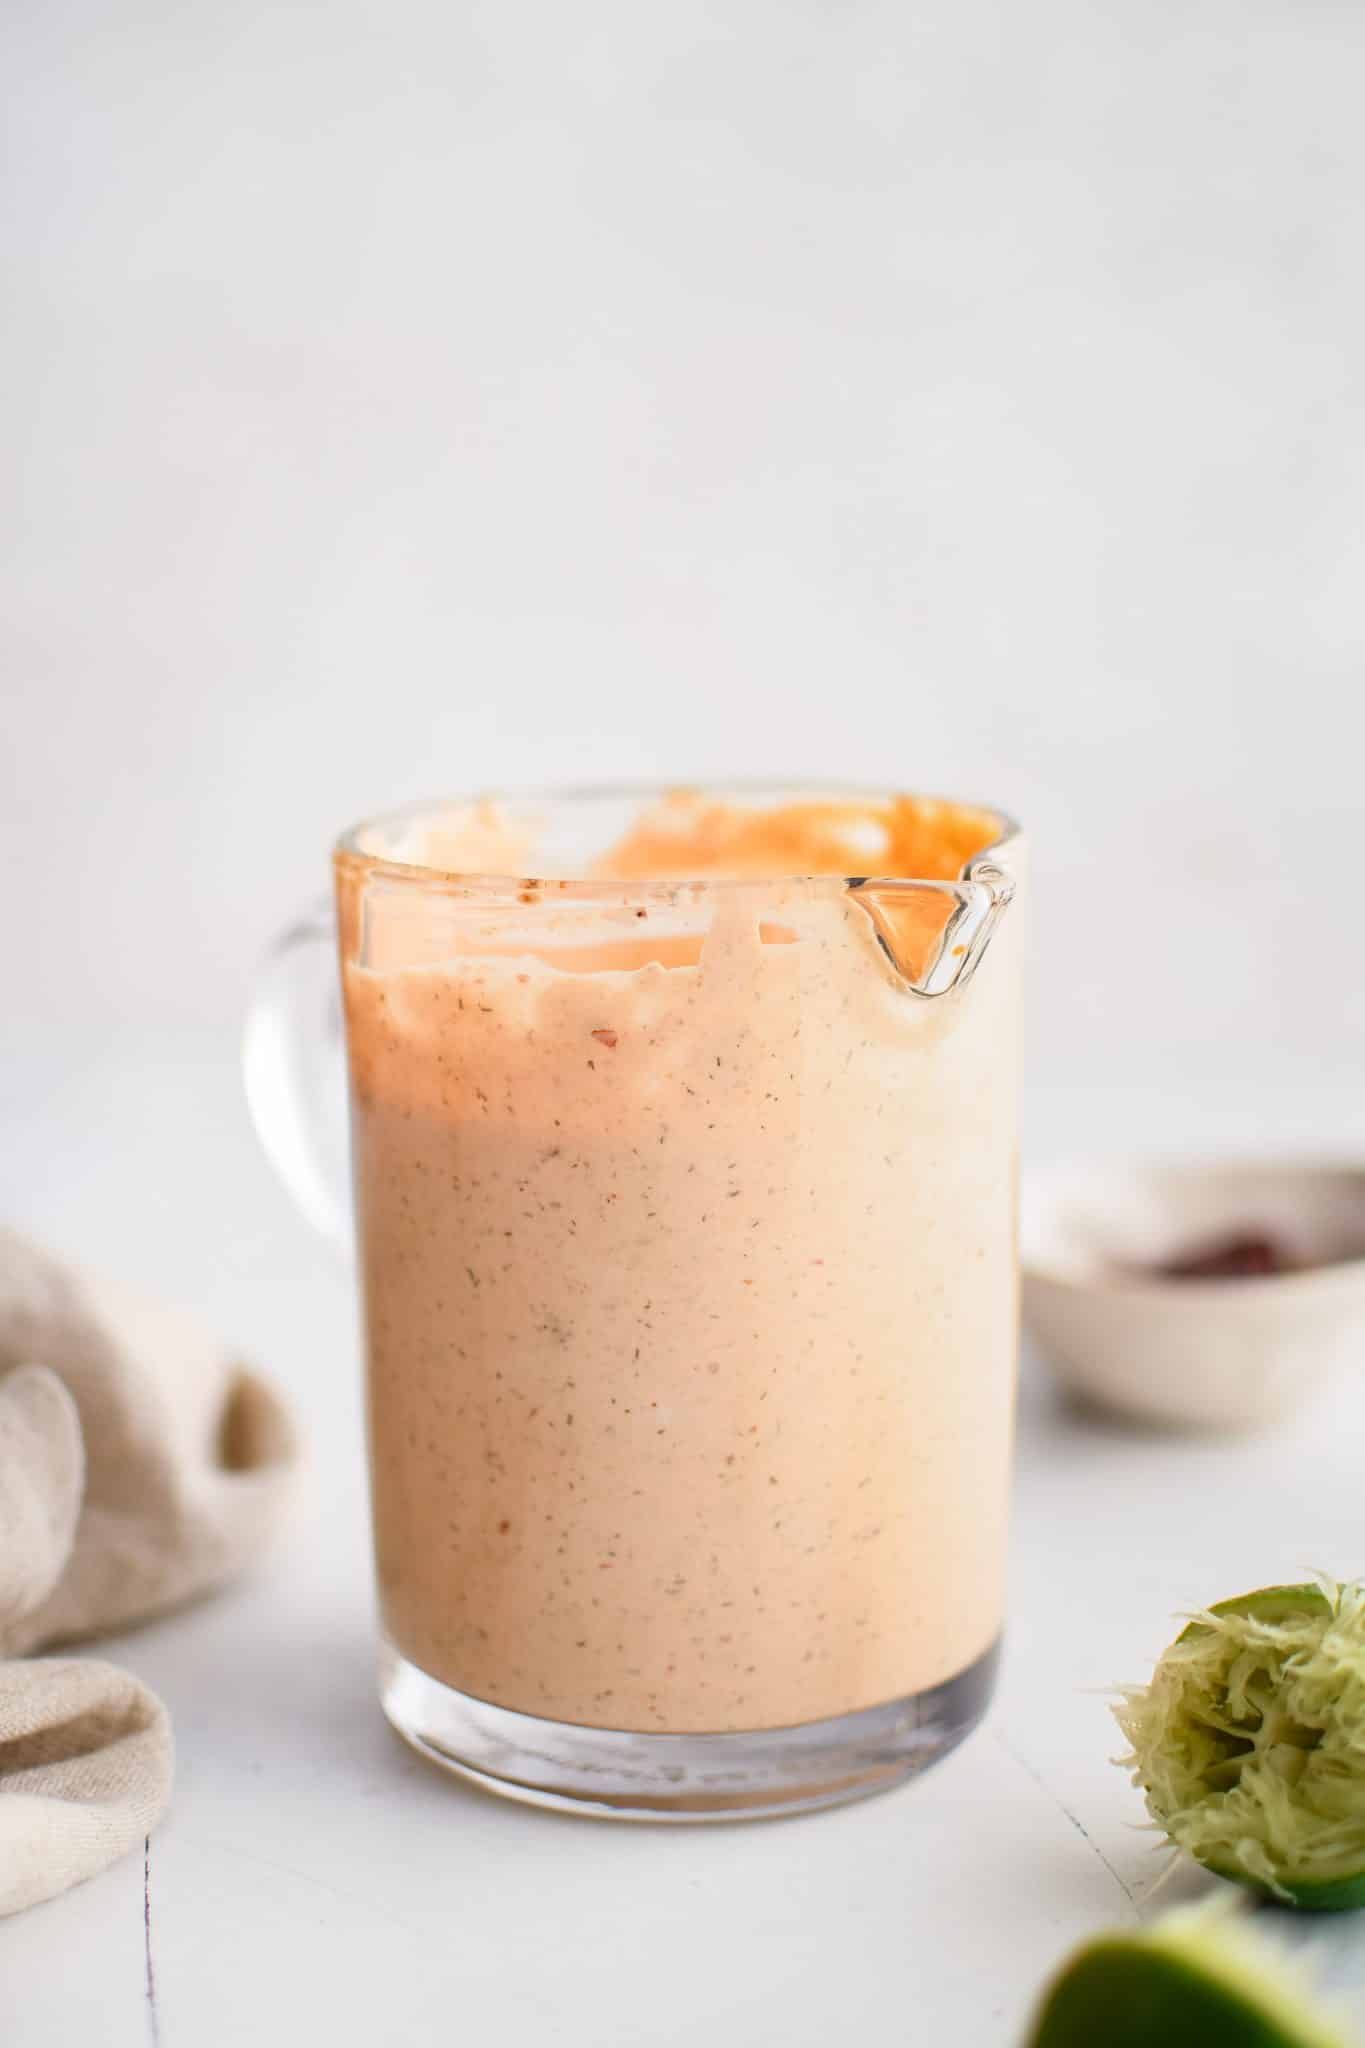 Small glass pitcher filled with thick and creamy chipotle ranch dressing.